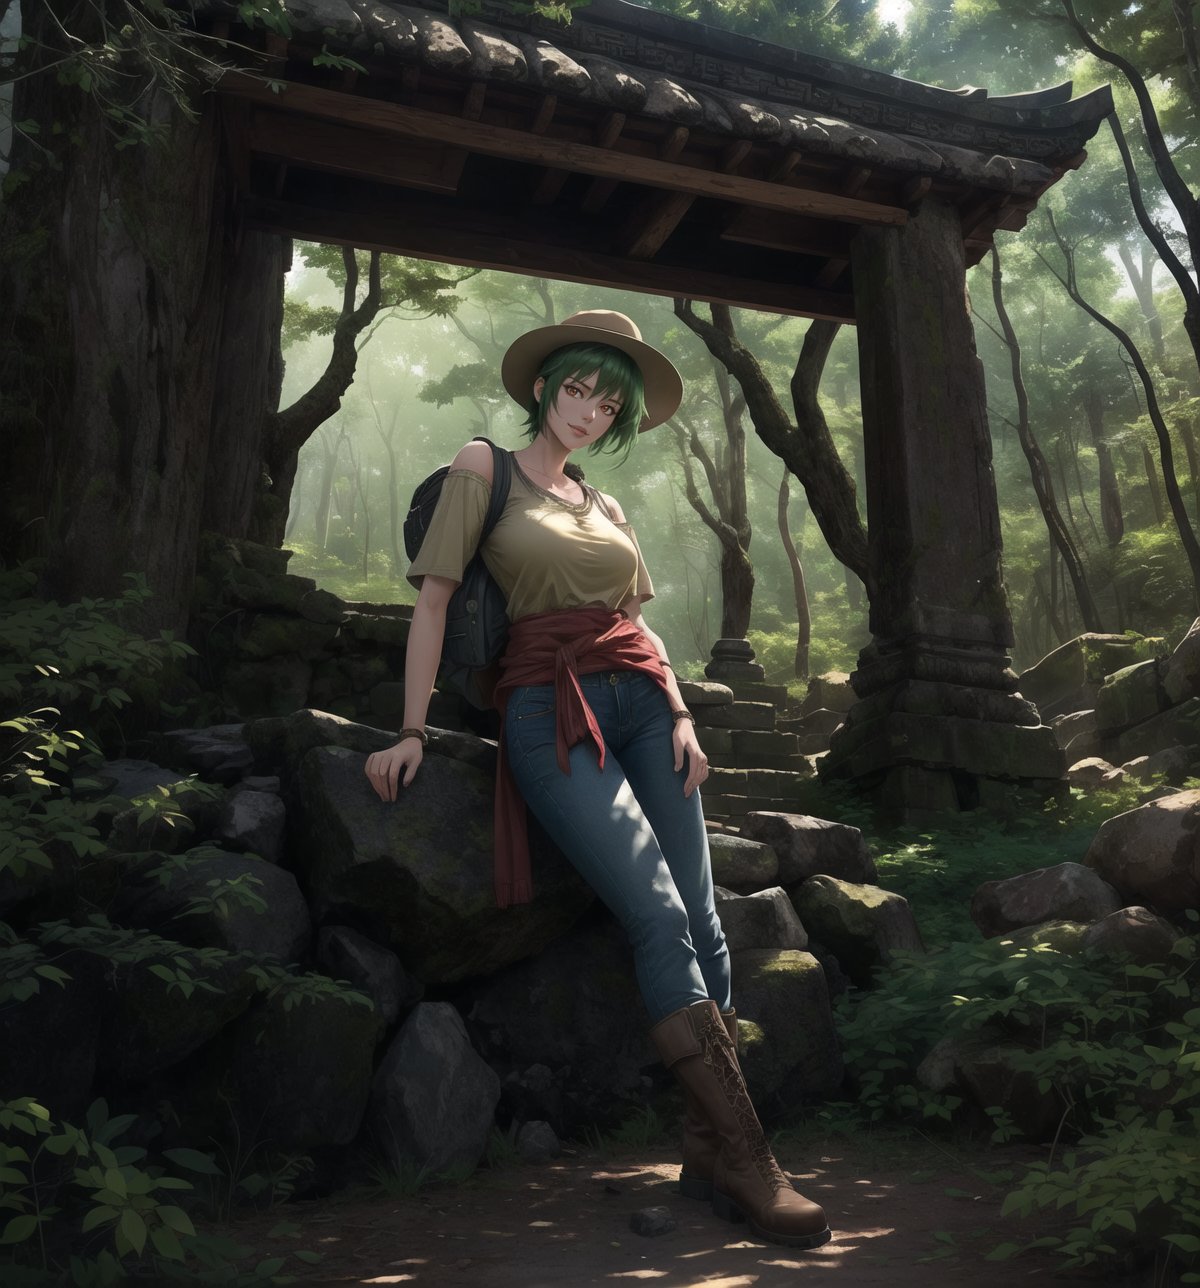 An adventure, archaeology, mystery, supernatural and anime masterpiece, rendered in crystal-clear 4K. A 30-year-old woman called Aiko, a brave and adventurous archaeologist, stands in a sensual and mysterious pose in an ancient temple in the middle of a forest. She is wearing an archaeologist's outfit consisting of a beige short-sleeved shirt, sturdy jeans and brown high boots. She also wears a brown backpack on her left shoulder, a beige wide-brimmed hat to protect her from the sun, a leather glove on her right hand and a flashlight around her waist. His green hair is cut in a modern and stylish short mohawk. His red eyes are looking at the viewer, smiling with white teeth, but with an air of mystery and danger. The scene takes place in an ancient temple in the middle of a forest, the place is mysterious and full of rock structures, wooden structures, carved rock structures and ancient ruins. The image highlights Aiko's sensual figure and the mysterious and supernatural elements of the ancient temple. The rock and wooden structures, together with Aiko, the ancient ruins and the sculptures, create an atmosphere of adventure, archaeology and mystery. The natural lighting of the forest and the shadows created by the structures enhance the details of the scene and create an even more mysterious atmosphere. Soft, shadowy lighting effects create a tense, mystery-laden atmosphere, while rough, detailed textures on the structures and Aiko's costume add realism to the image. | A sensual and mysterious scene of Aiko, a brave archaeologist in an ancient temple in the middle of a forest, mixing elements of adventure, archaeology, mystery and the supernatural in anime style. | (((((The image reveals a full-body shot as she assumes a sensual pose, engagingly leaning against a structure within the scene in an exciting manner. She takes on a relaxed pose as she interacts, boldly leaning on a structure, leaning back in an exciting way.))))). | ((full-body shot)), ((perfect pose)), ((perfect fingers, better hands, perfect hands)), ((perfect legs, perfect feet)), ((perfect design)), ((perfect composition)), ((very detailed scene, very detailed background, perfect layout, correct imperfections)), More Detail, Enhance